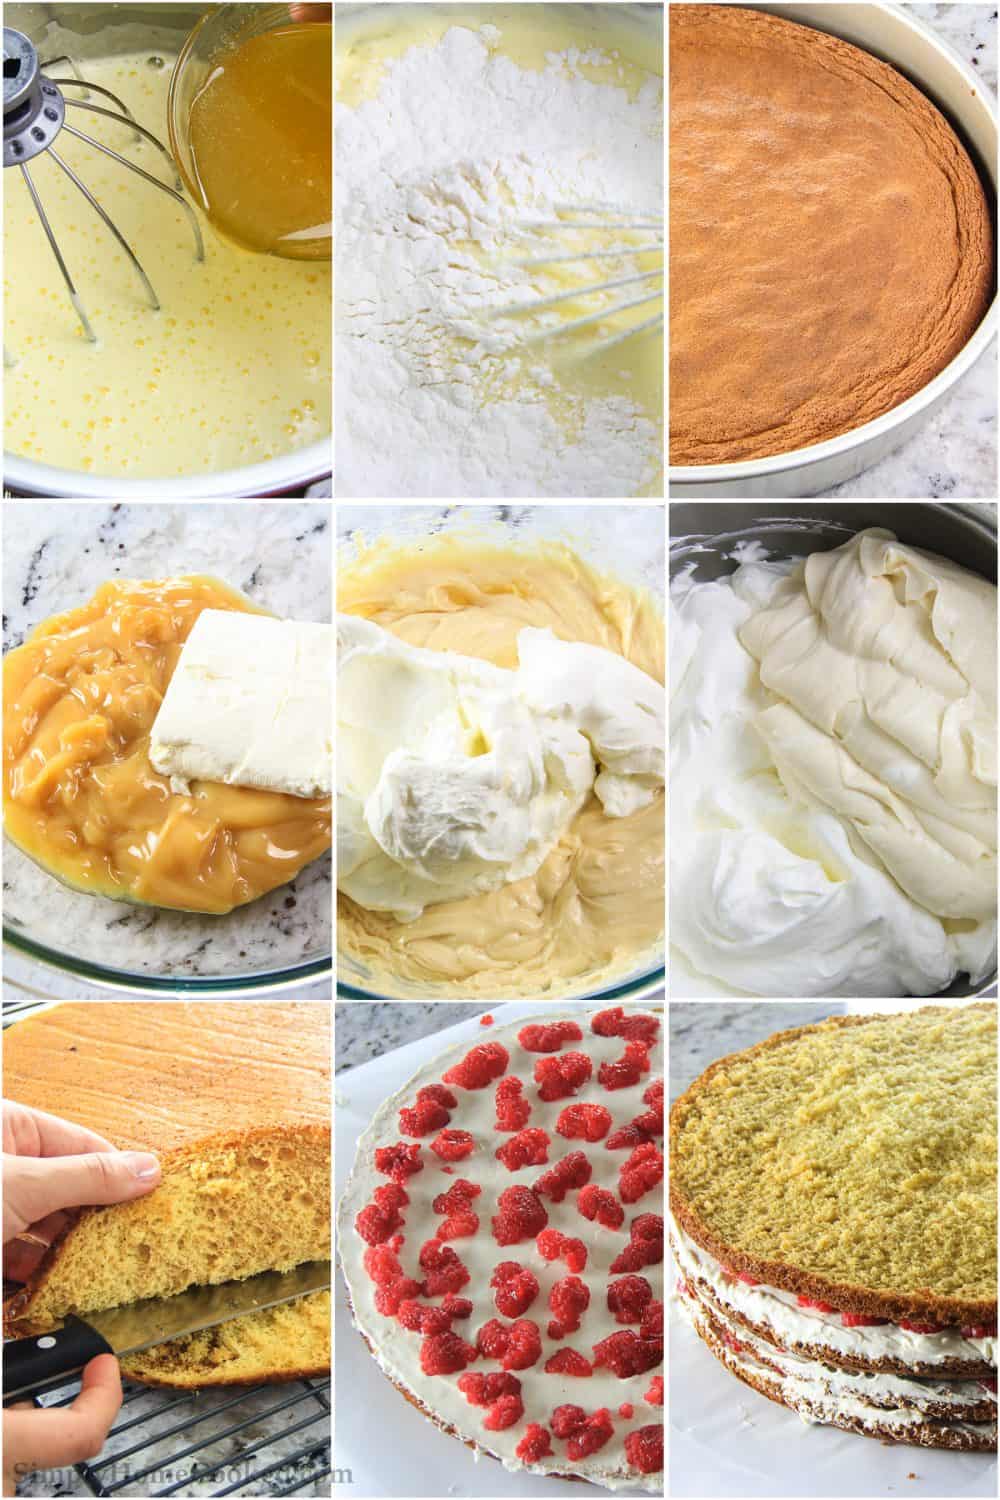 Photo collage of the process of making the raspberry cake and layering it to serve